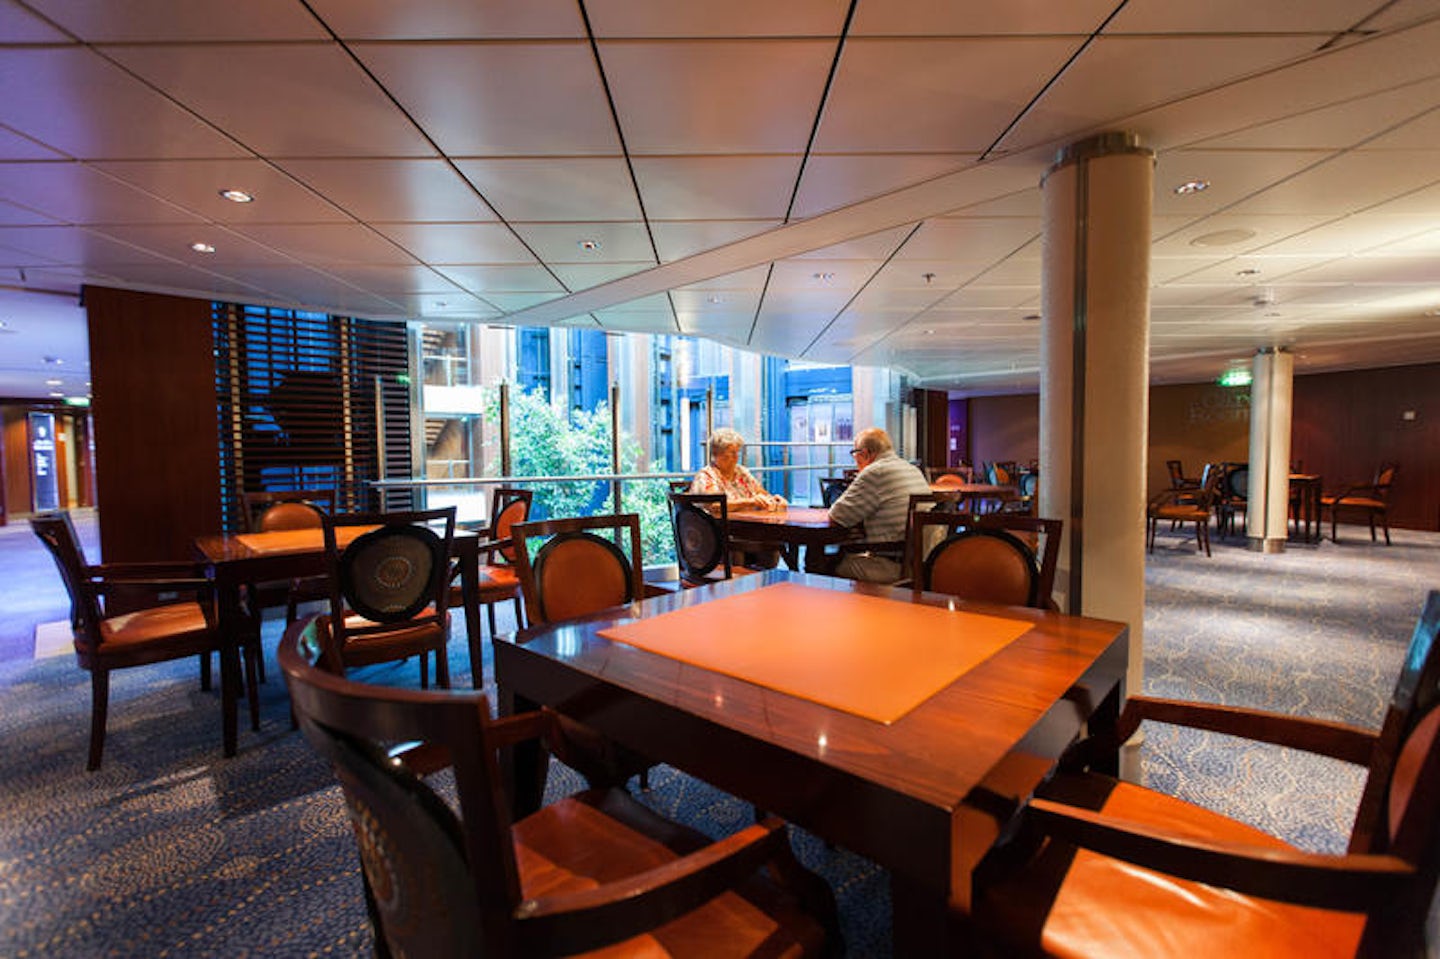 The Card Room on Celebrity Equinox